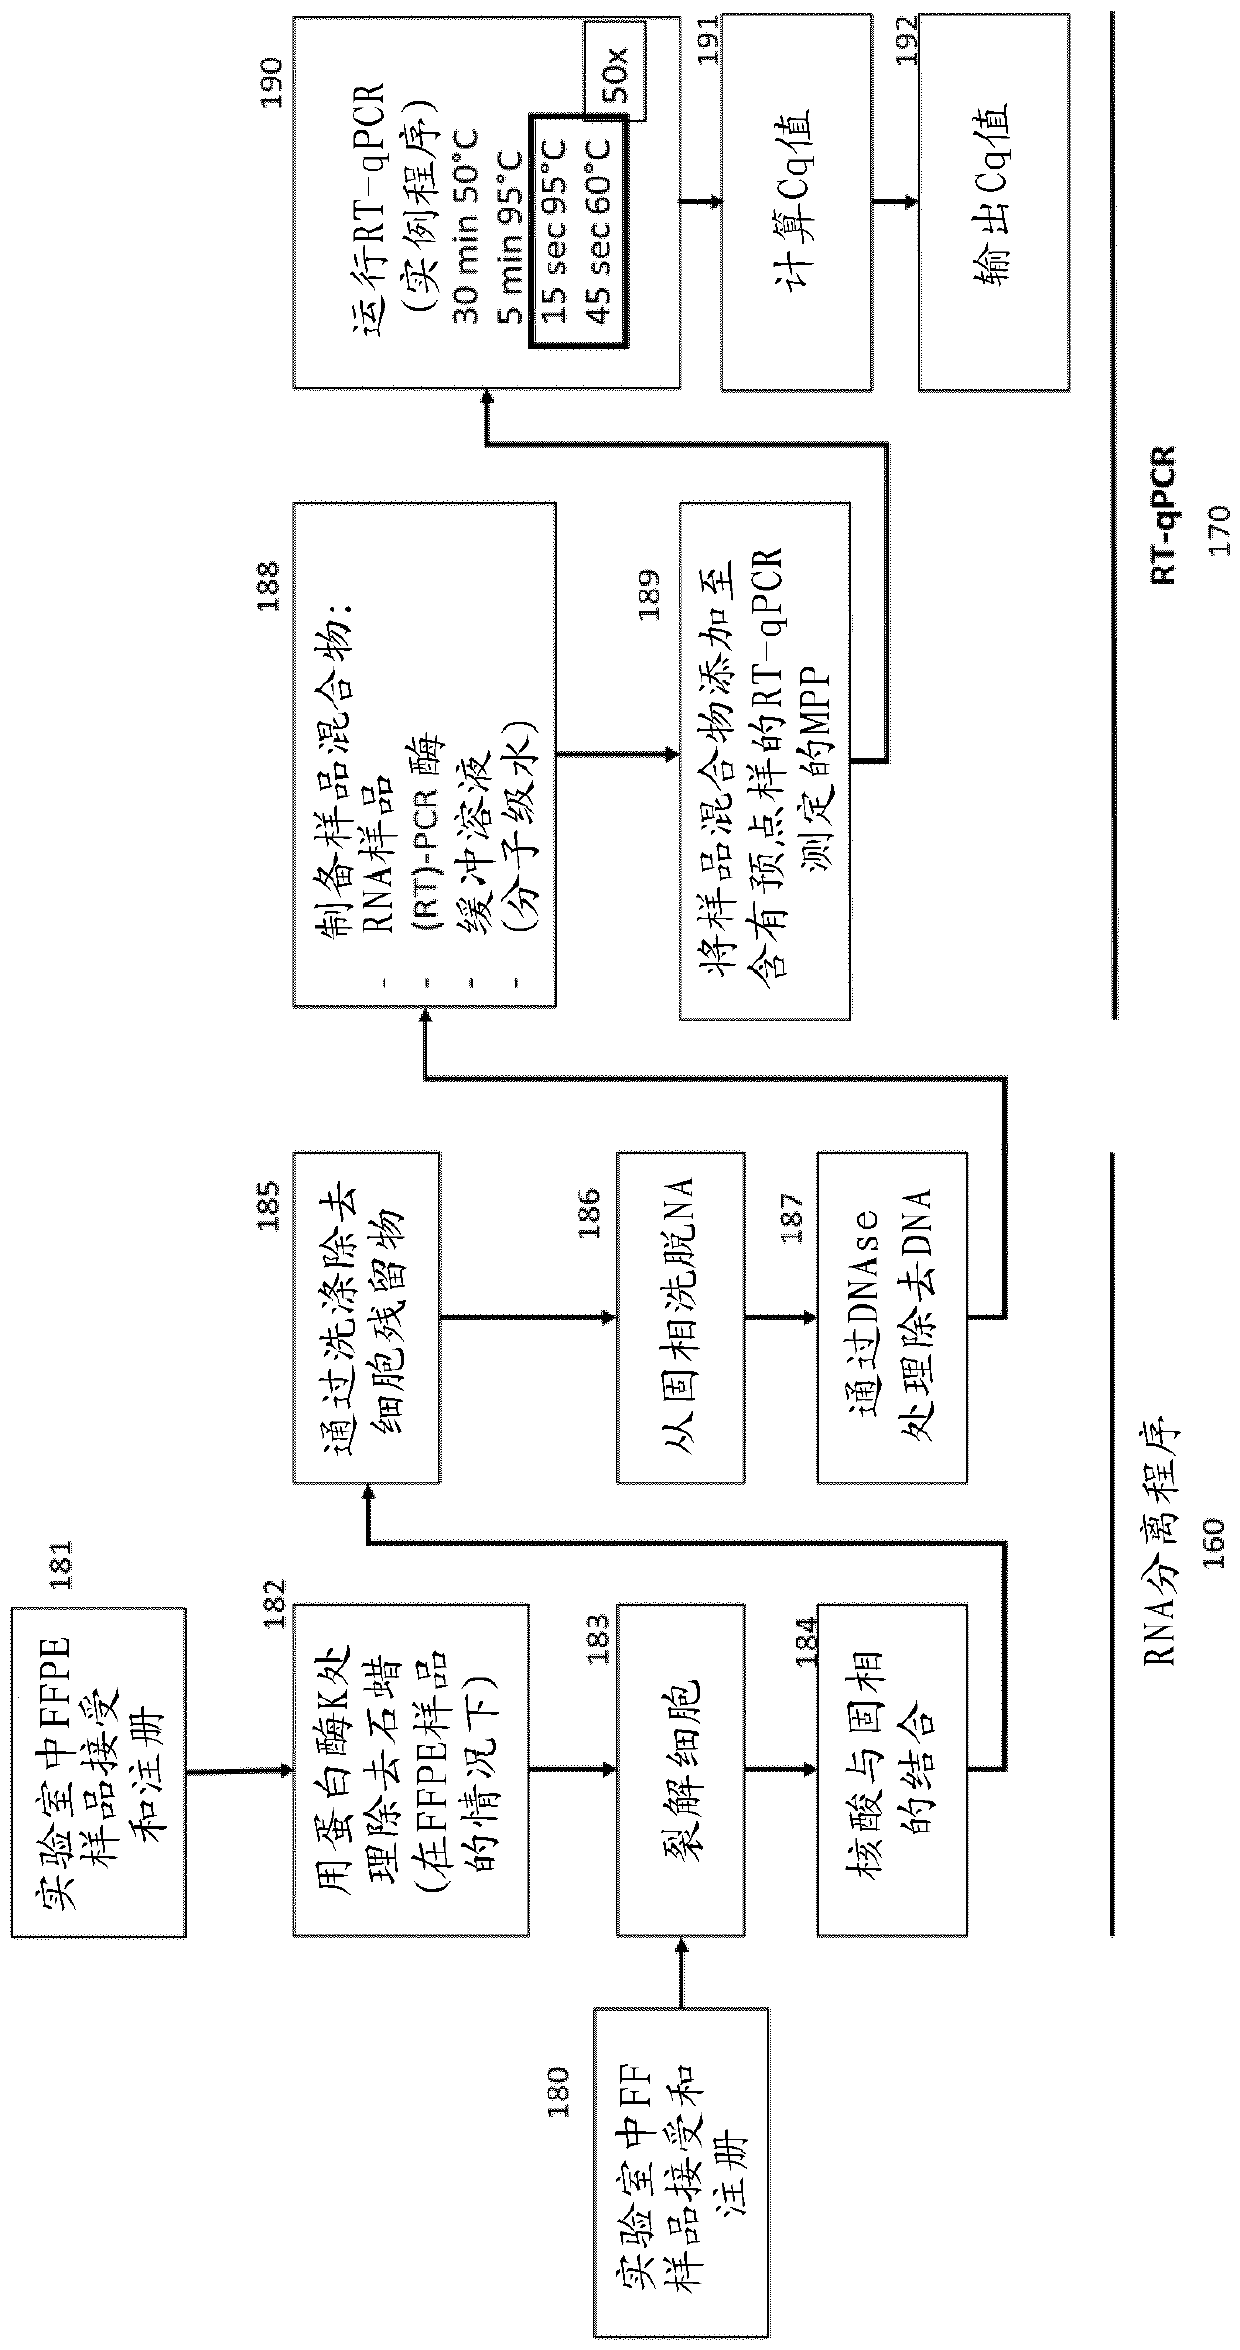 Medical prognosis and prediction of treatment response using multiple cellular signaling pathway activities